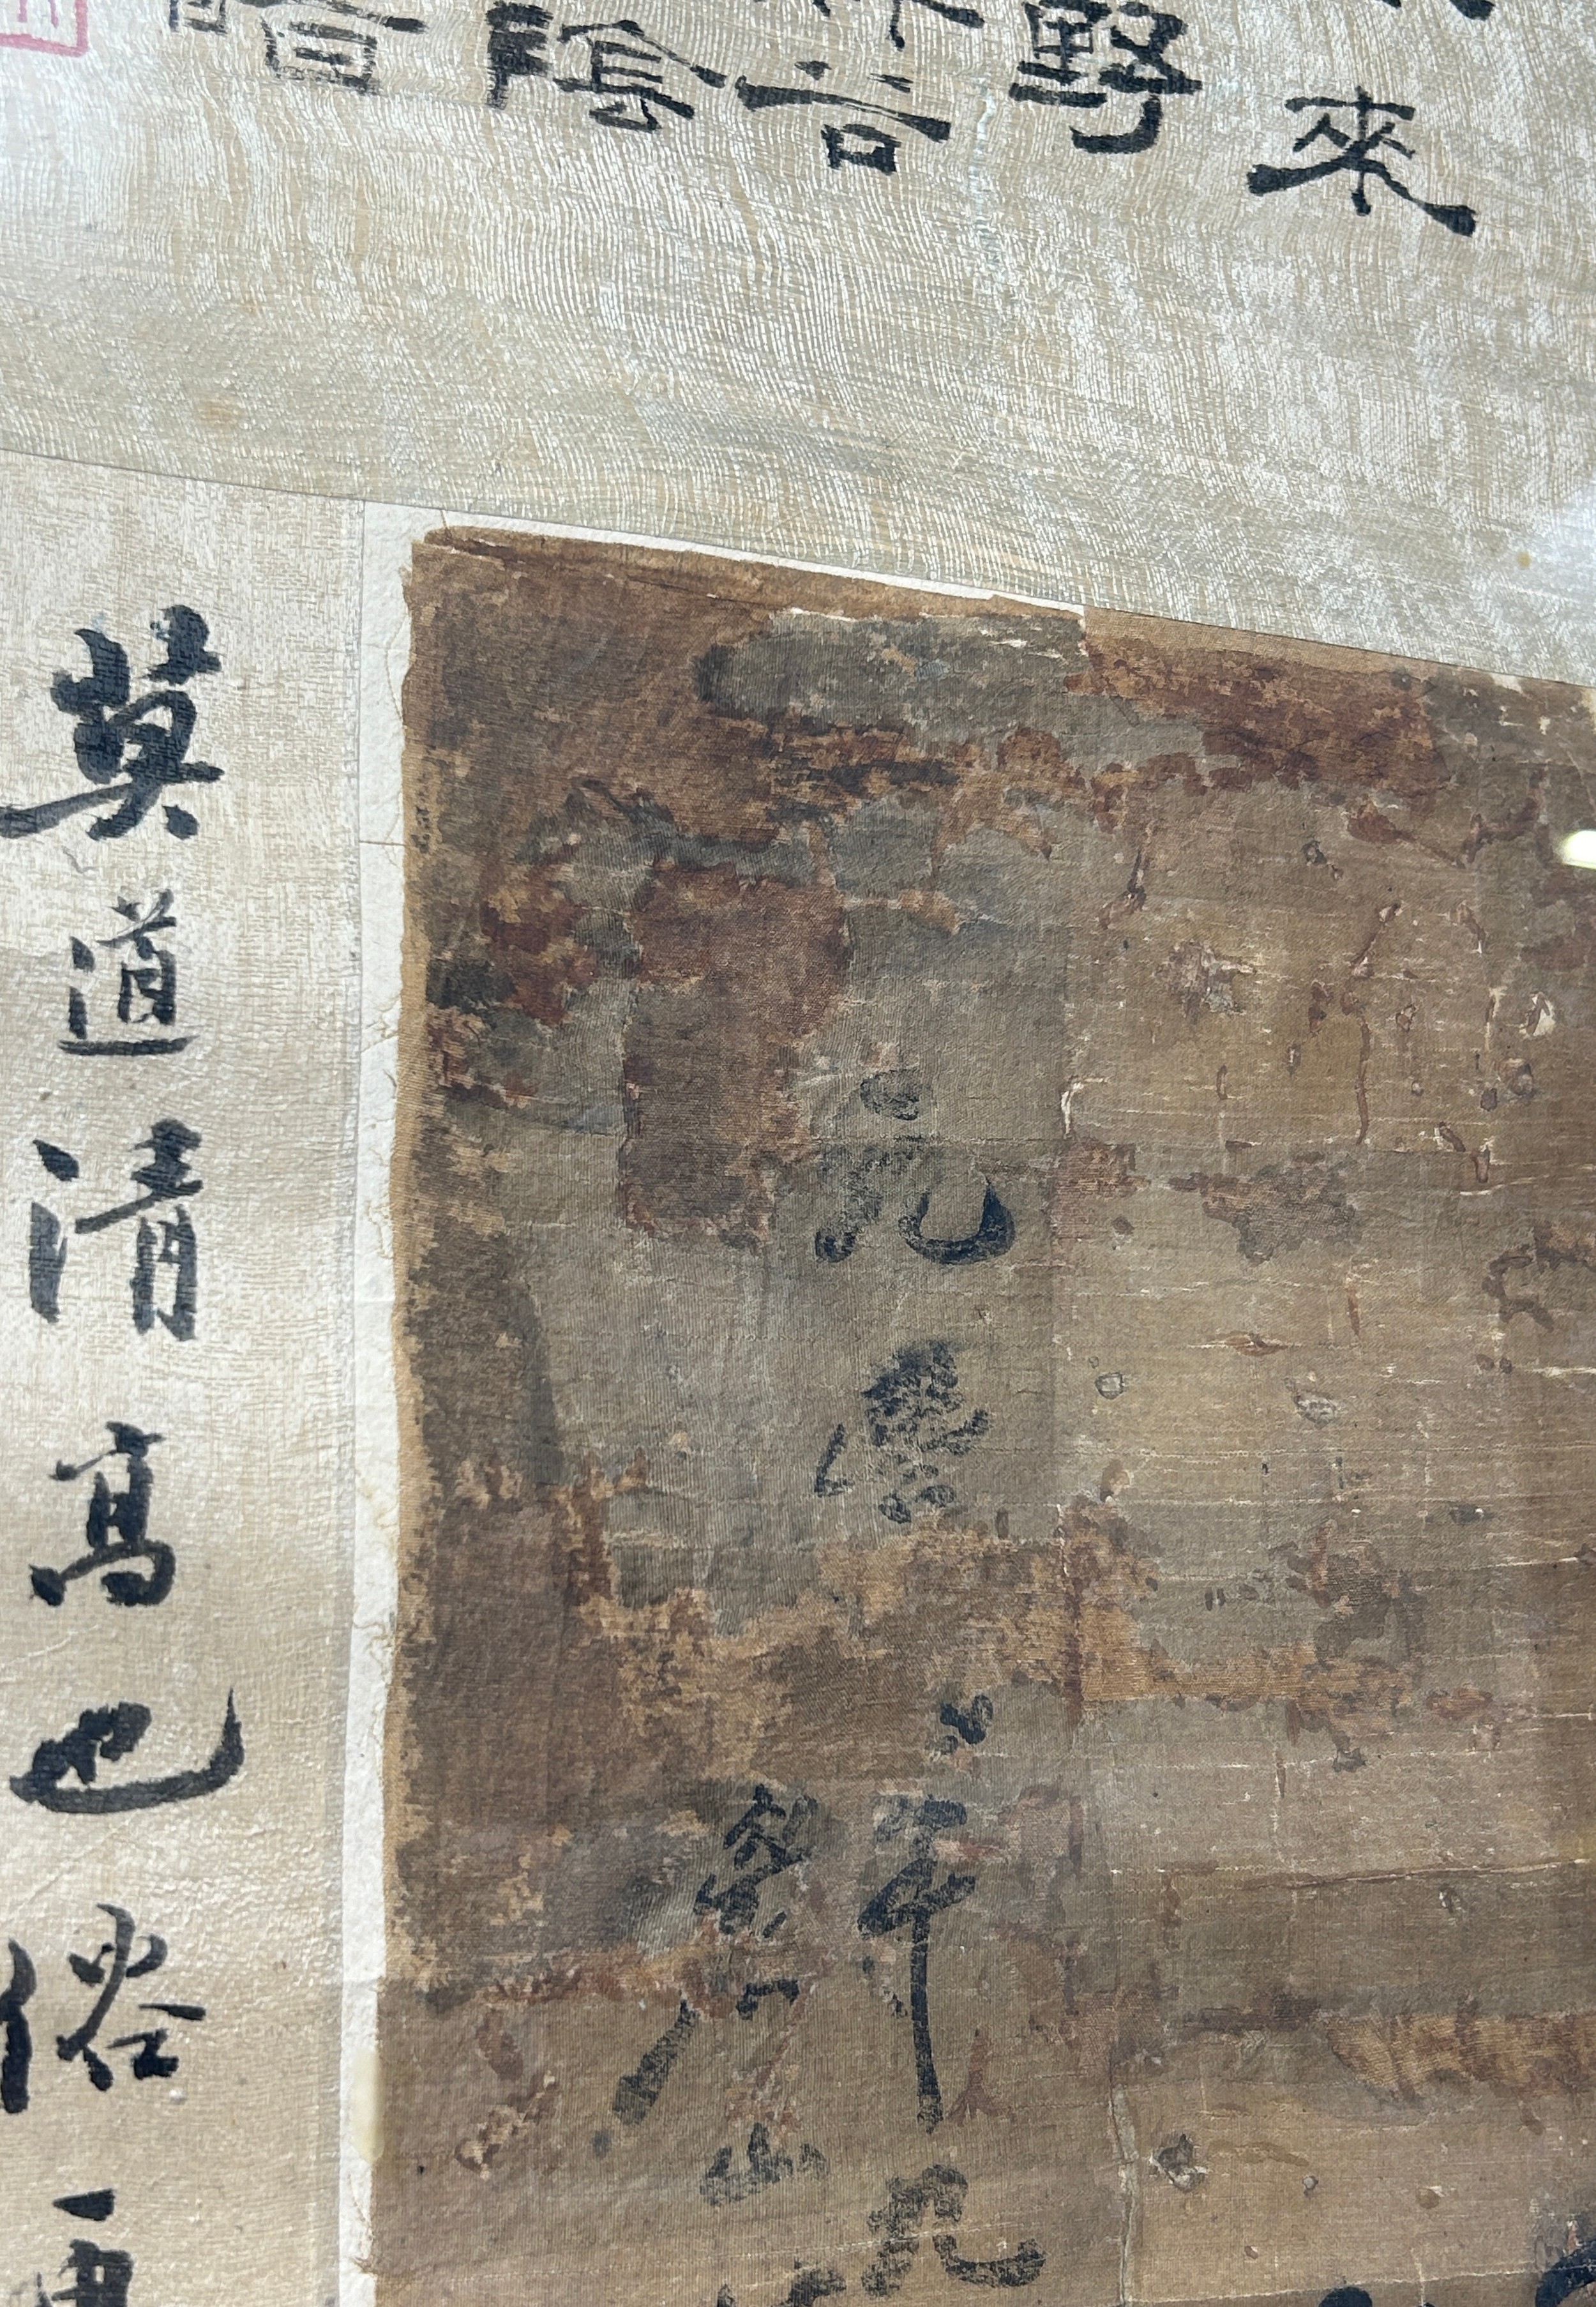 AFTER SU SHI (SU DONGPO) (1037-1101) : A PAINTING ON SCROLL DEPICTING BAMBOO STALKS WITH WRITING - Image 11 of 17